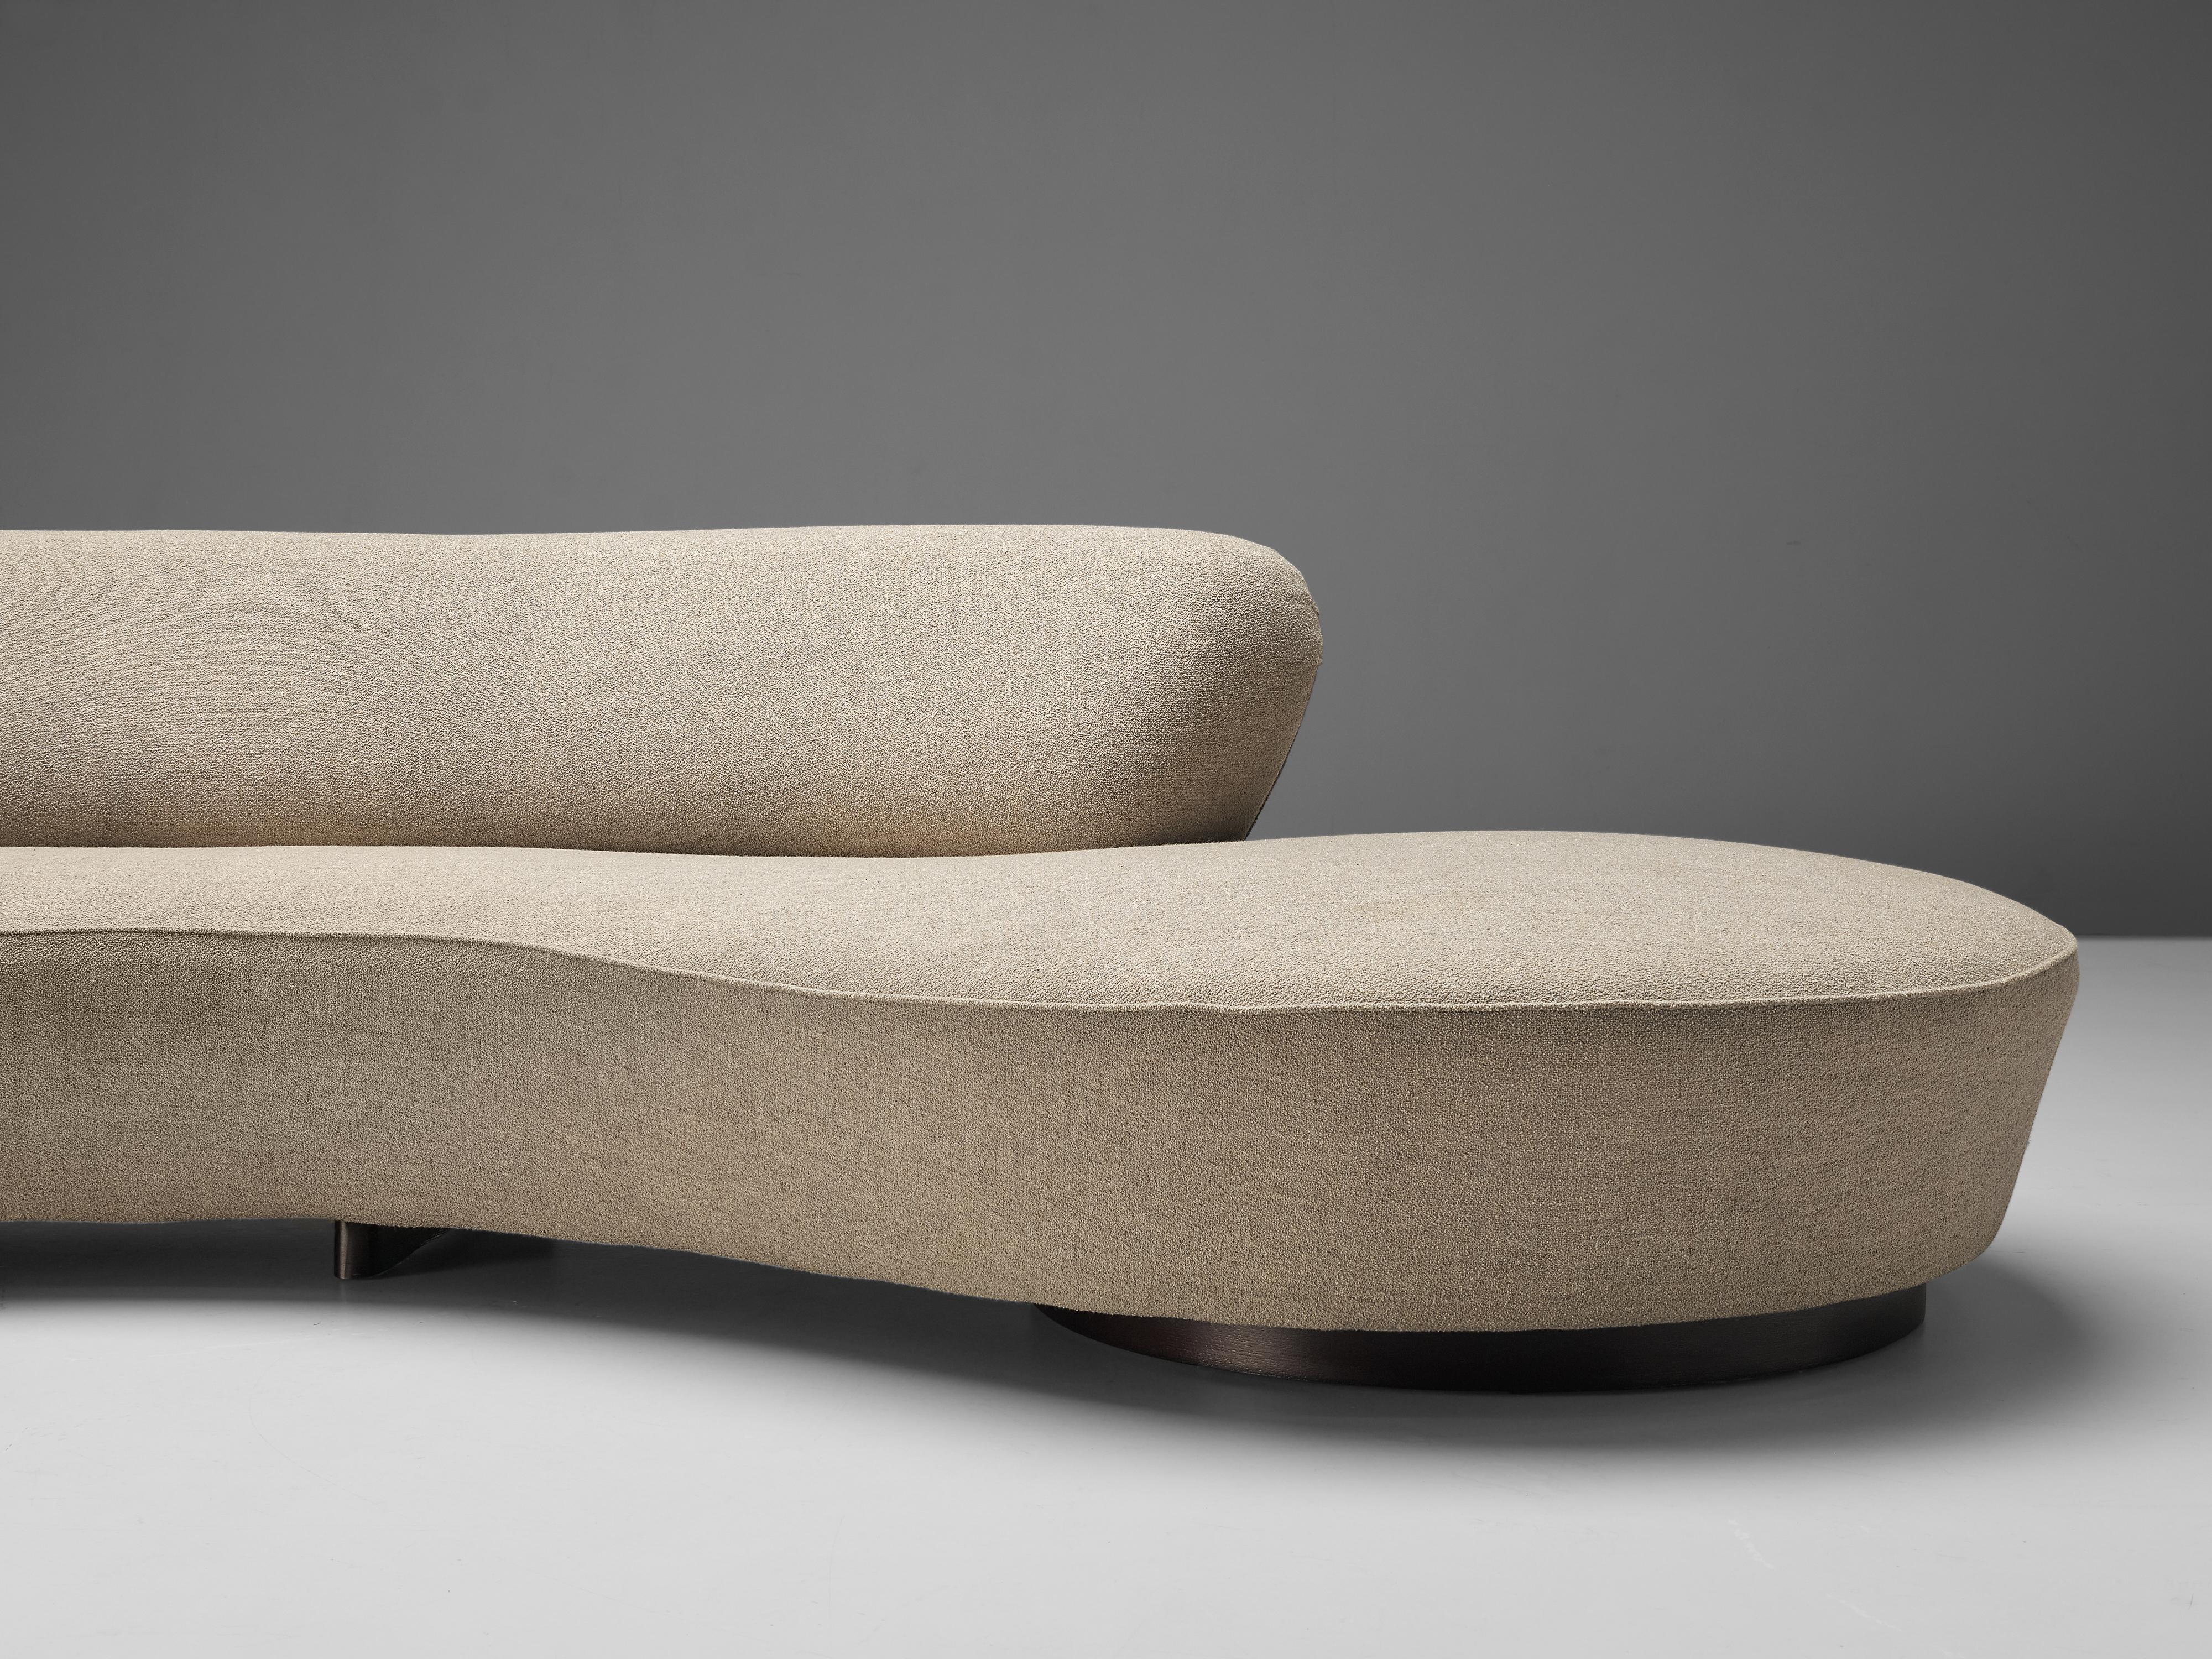 Late 20th Century Iconic Vladimir Kagan 'Serpentine' Sofa in Off-White Upholstery